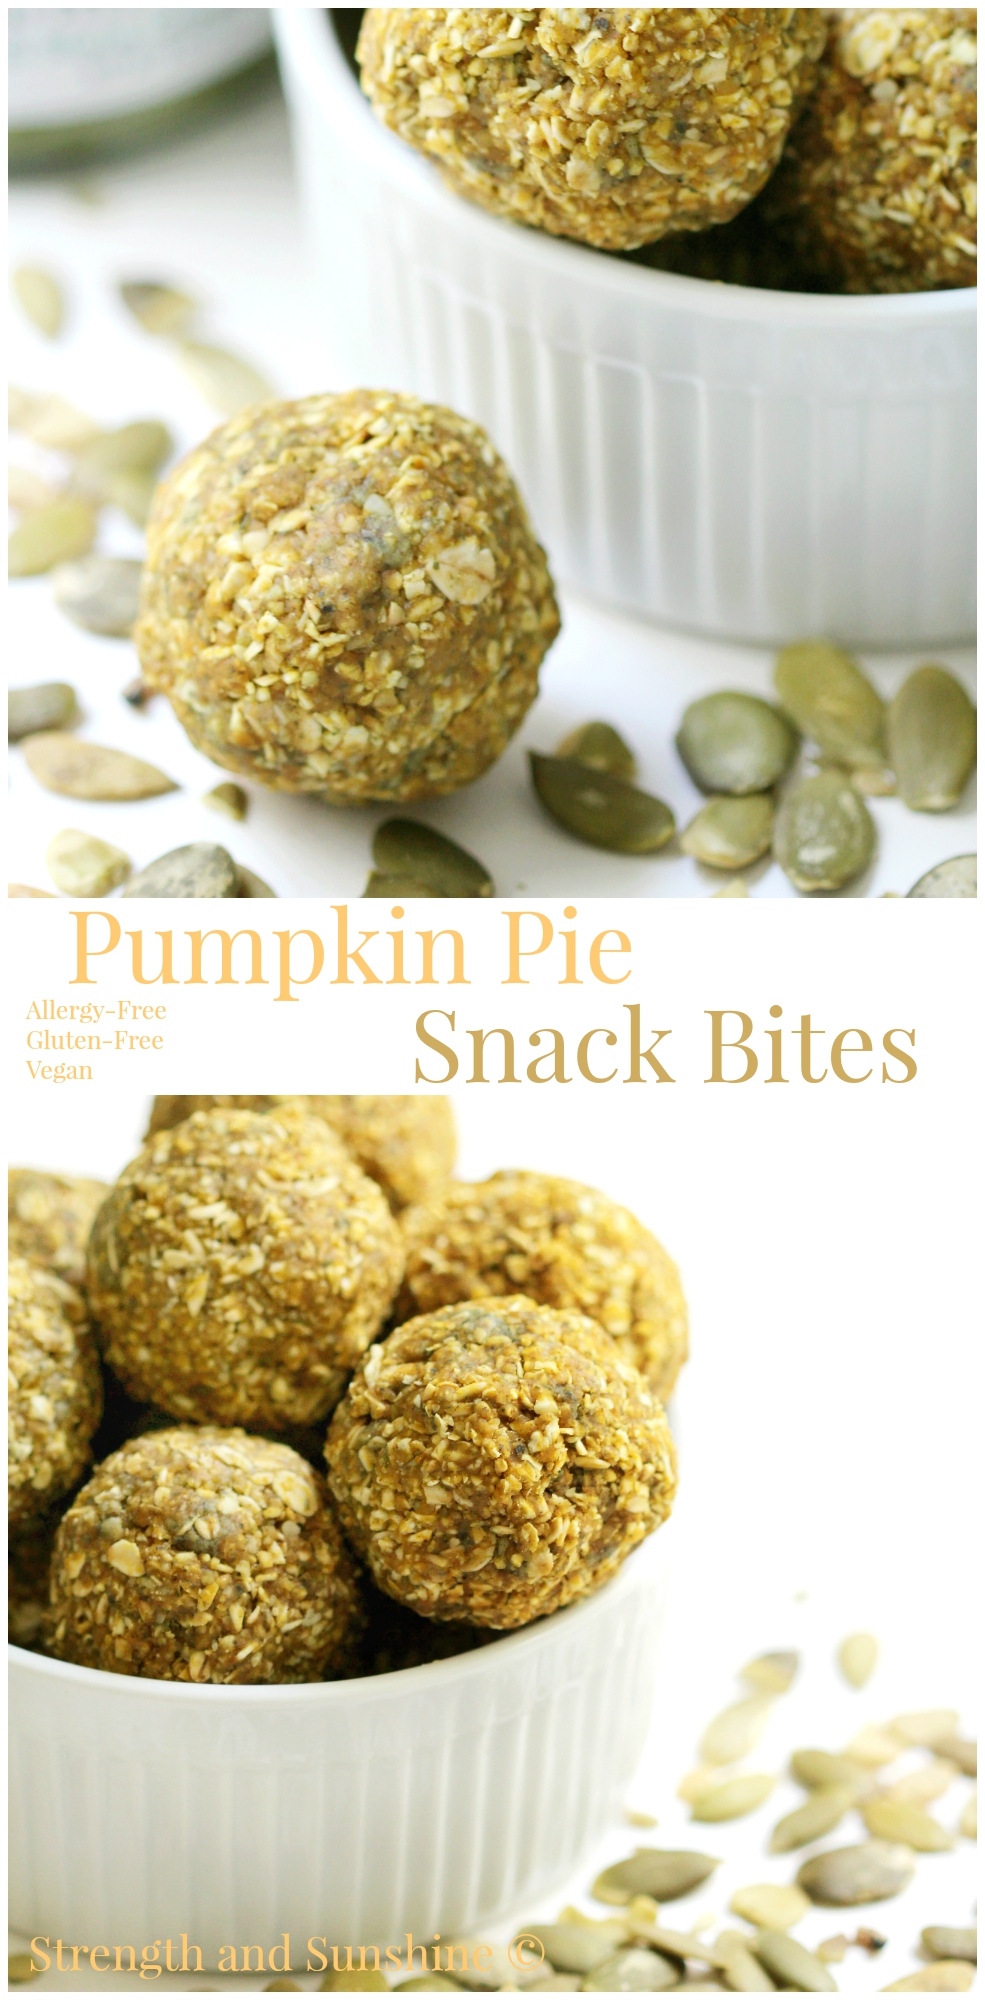 Pumpkin Pie Snack Bites | Strength and Sunshine @RebeccaGF666 Have your pumpkin pie all in one bite. Pumpkin seeds, butter, puree and spice along with whole grain oats, combine to create a healthy allergy-free, gluten-free, and vegan snack bite! Enjoy the flavor of Fall with no baking required!